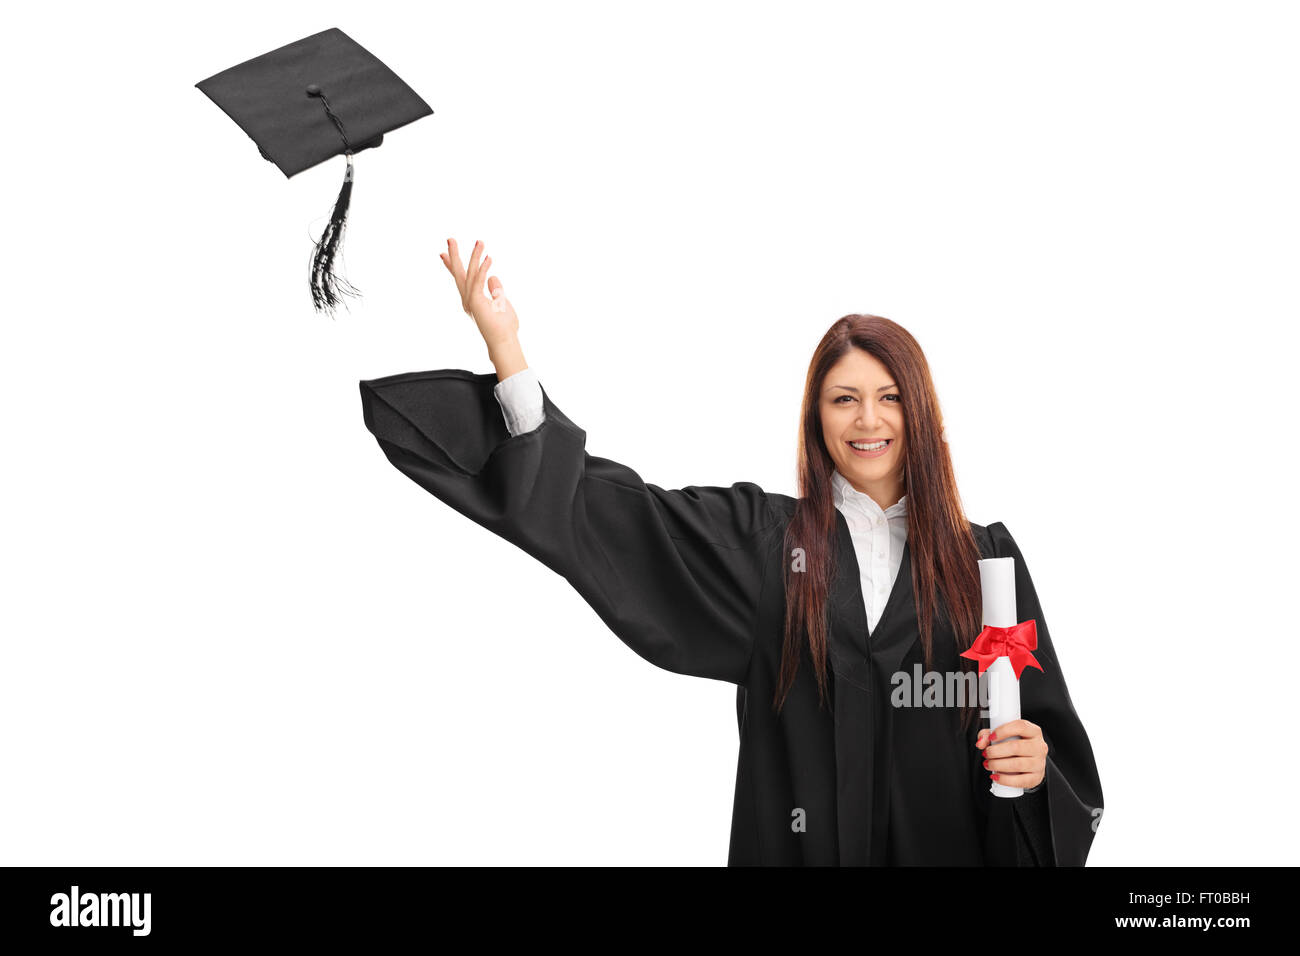 Graduation Hat Stock Photos and Pictures - 235,438 Images